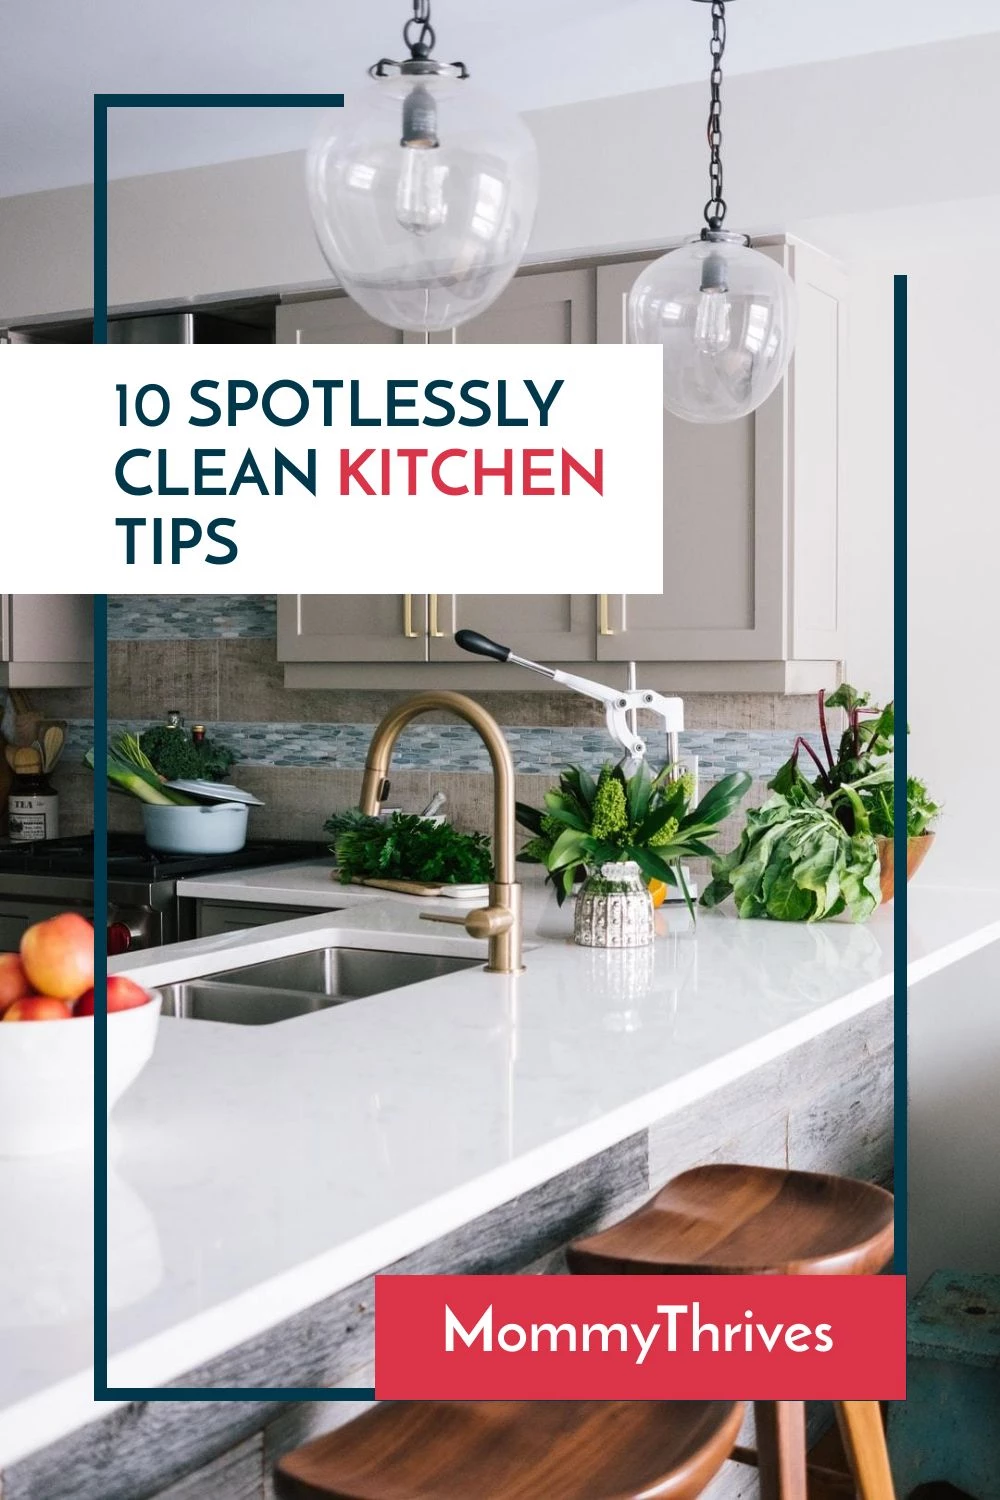 14 Kitchen Cleaning Hacks for a Spotless Home - Aviva Ireland